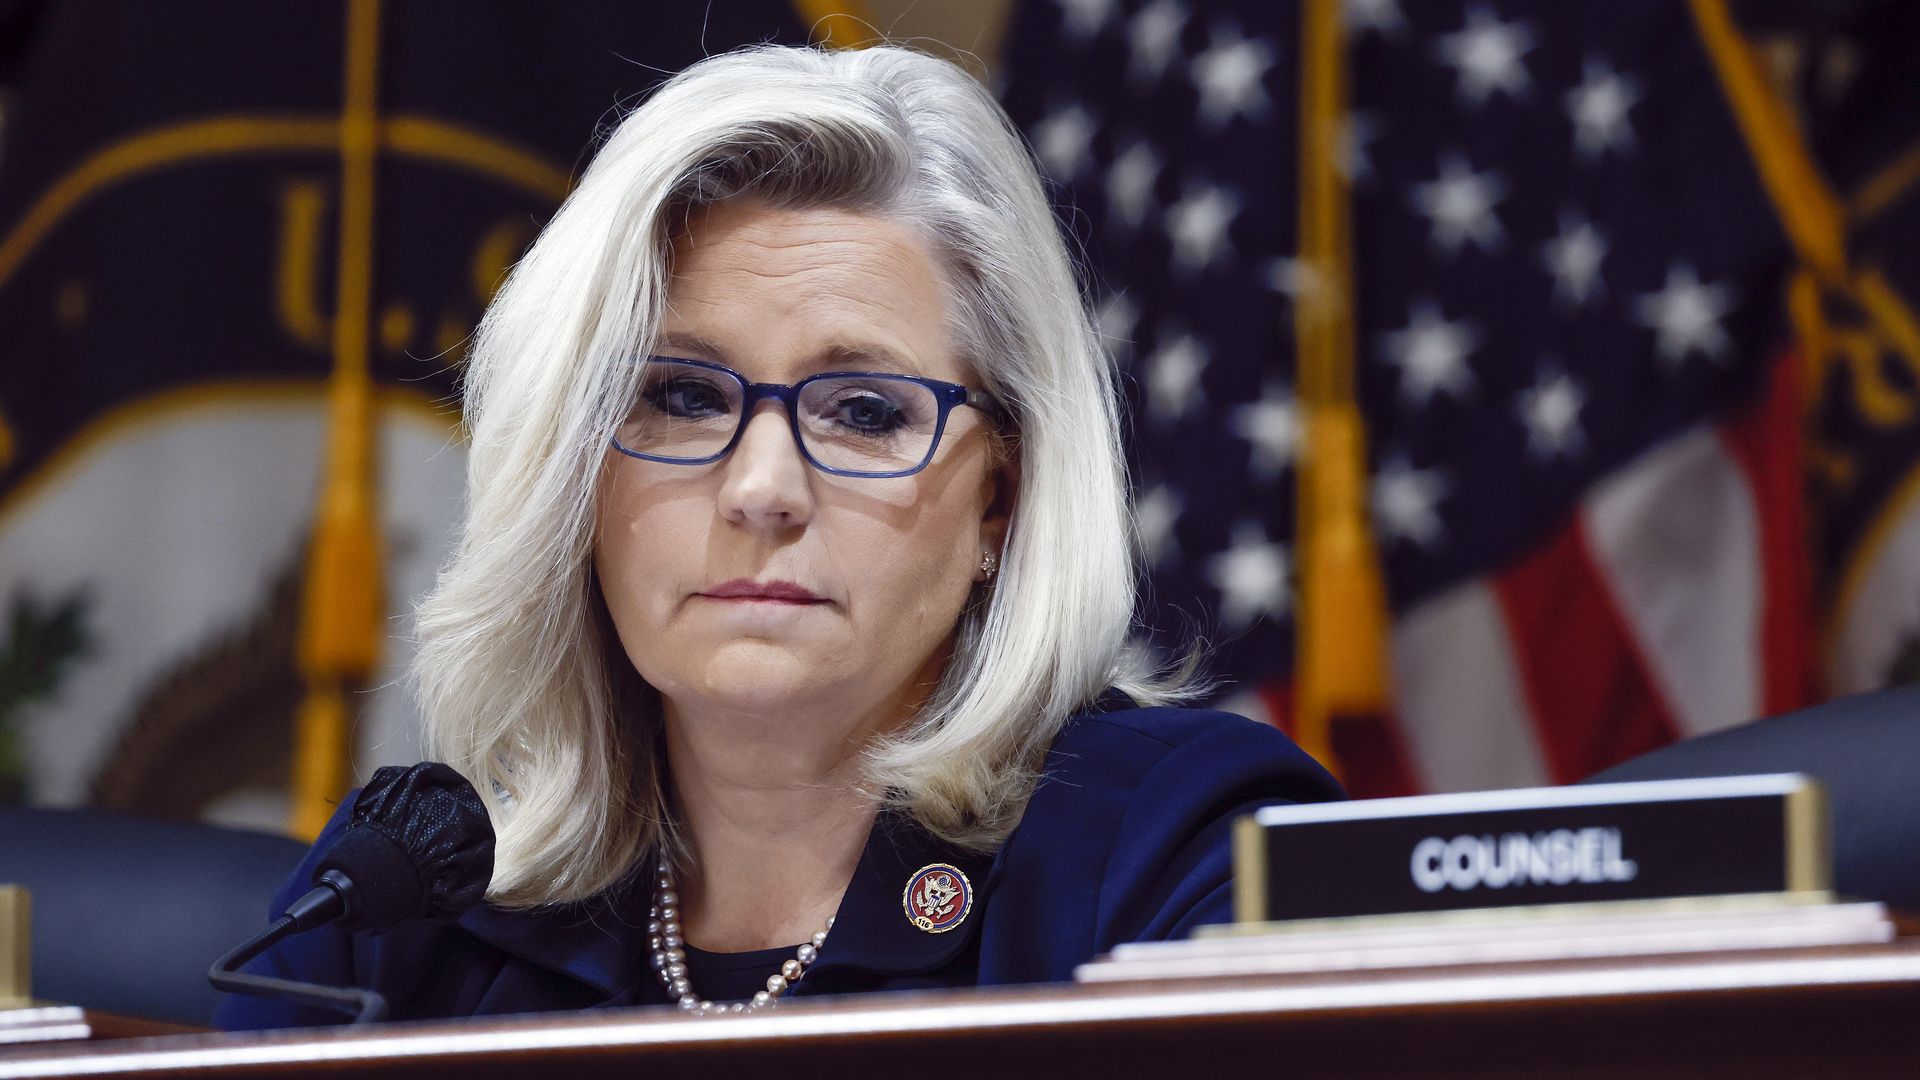 Rep. Liz Cheney, wearing a blue blazer, glasses and a pearl necklace, sits behind a podium at a Jan. 6 committee hearing.